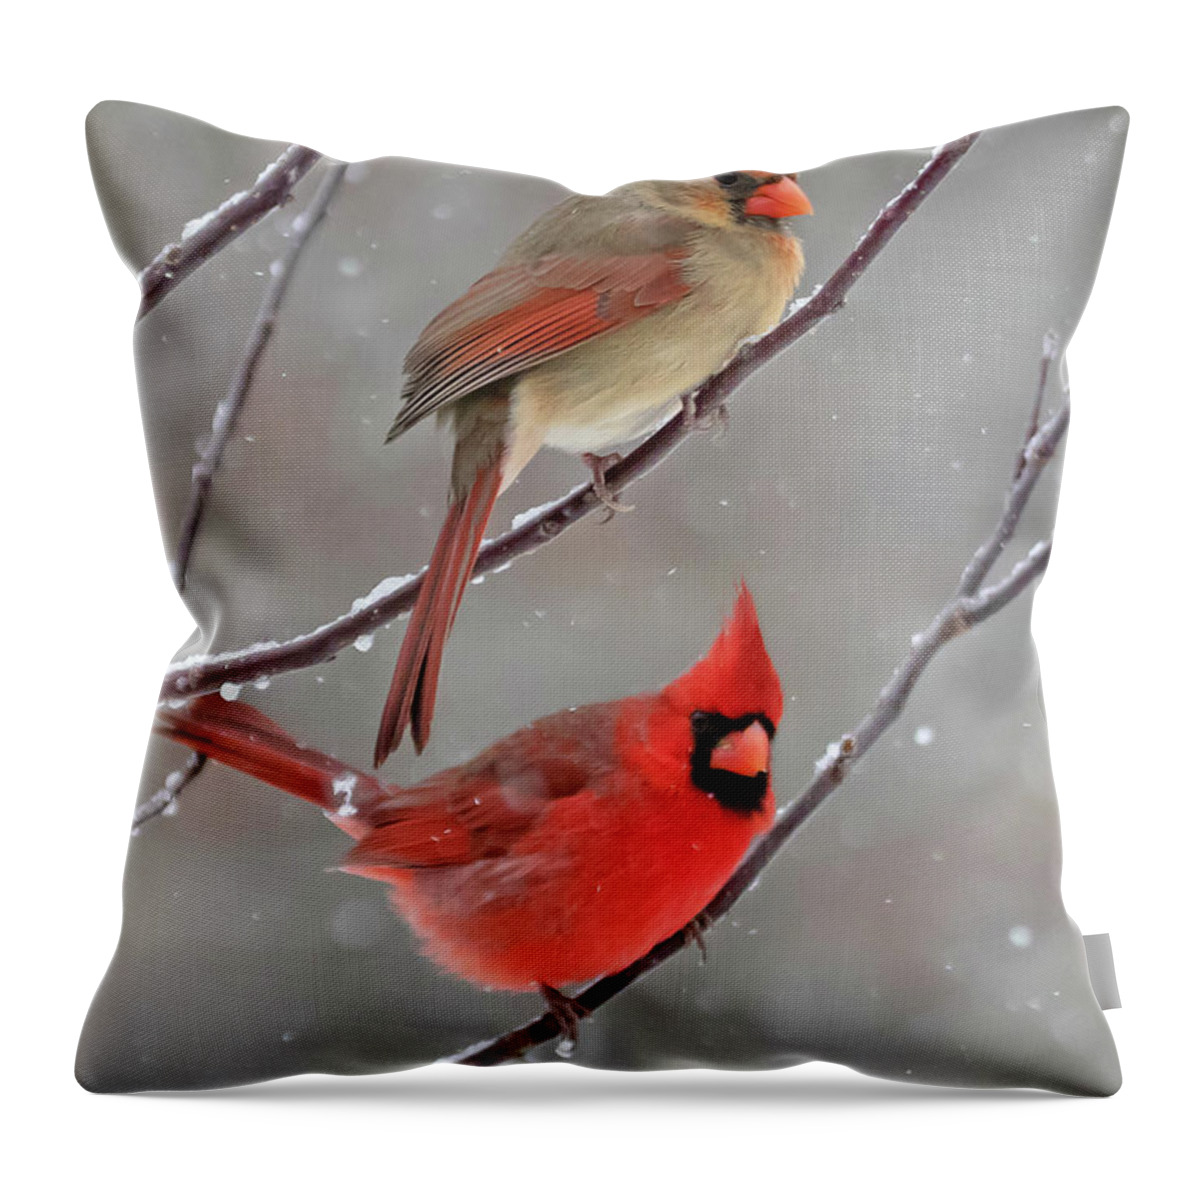 Snow Throw Pillow featuring the photograph Snow Day by Mindy Musick King